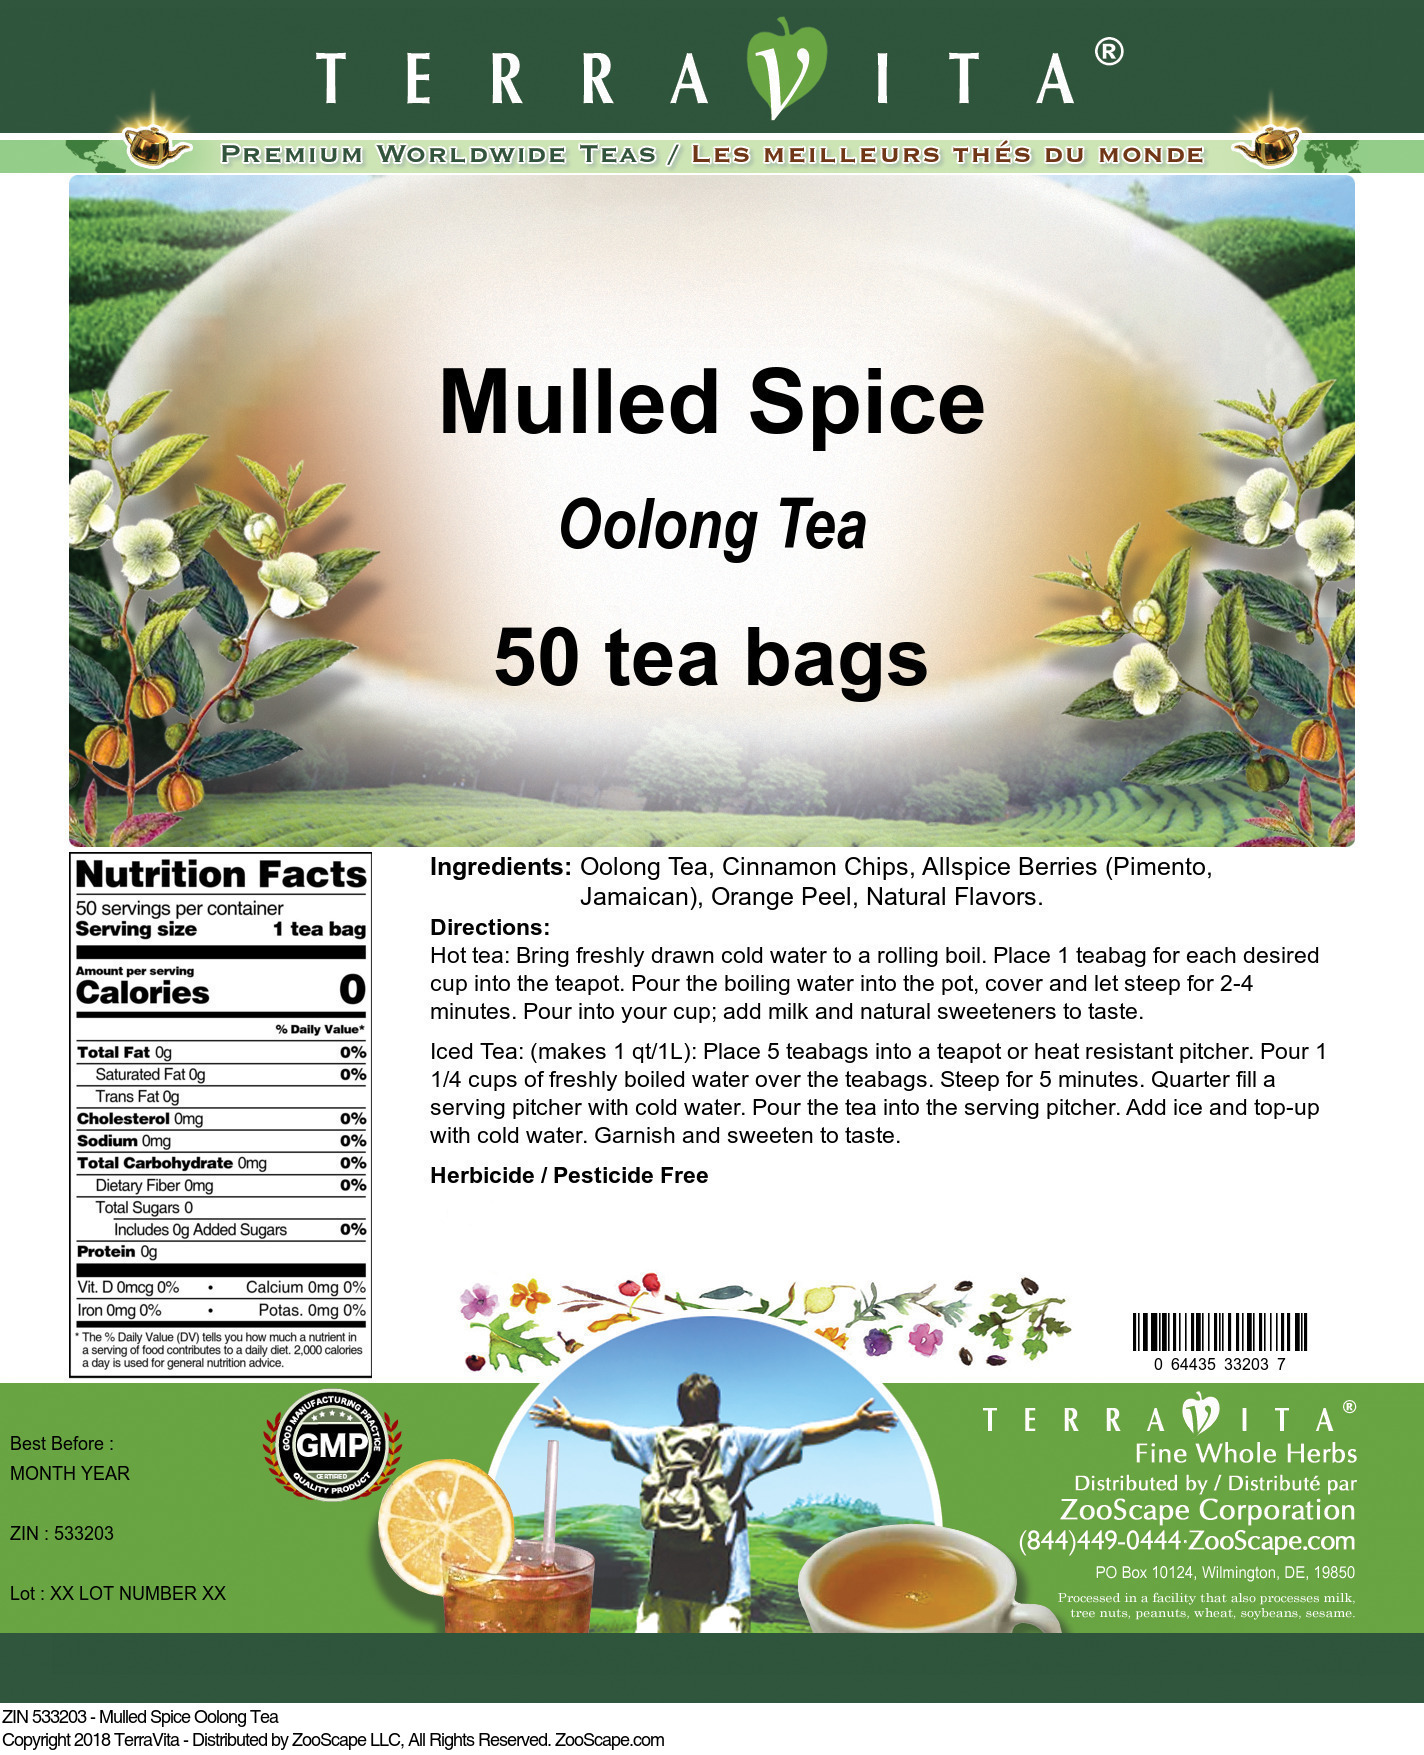 Mulled Spice Oolong Tea - Label